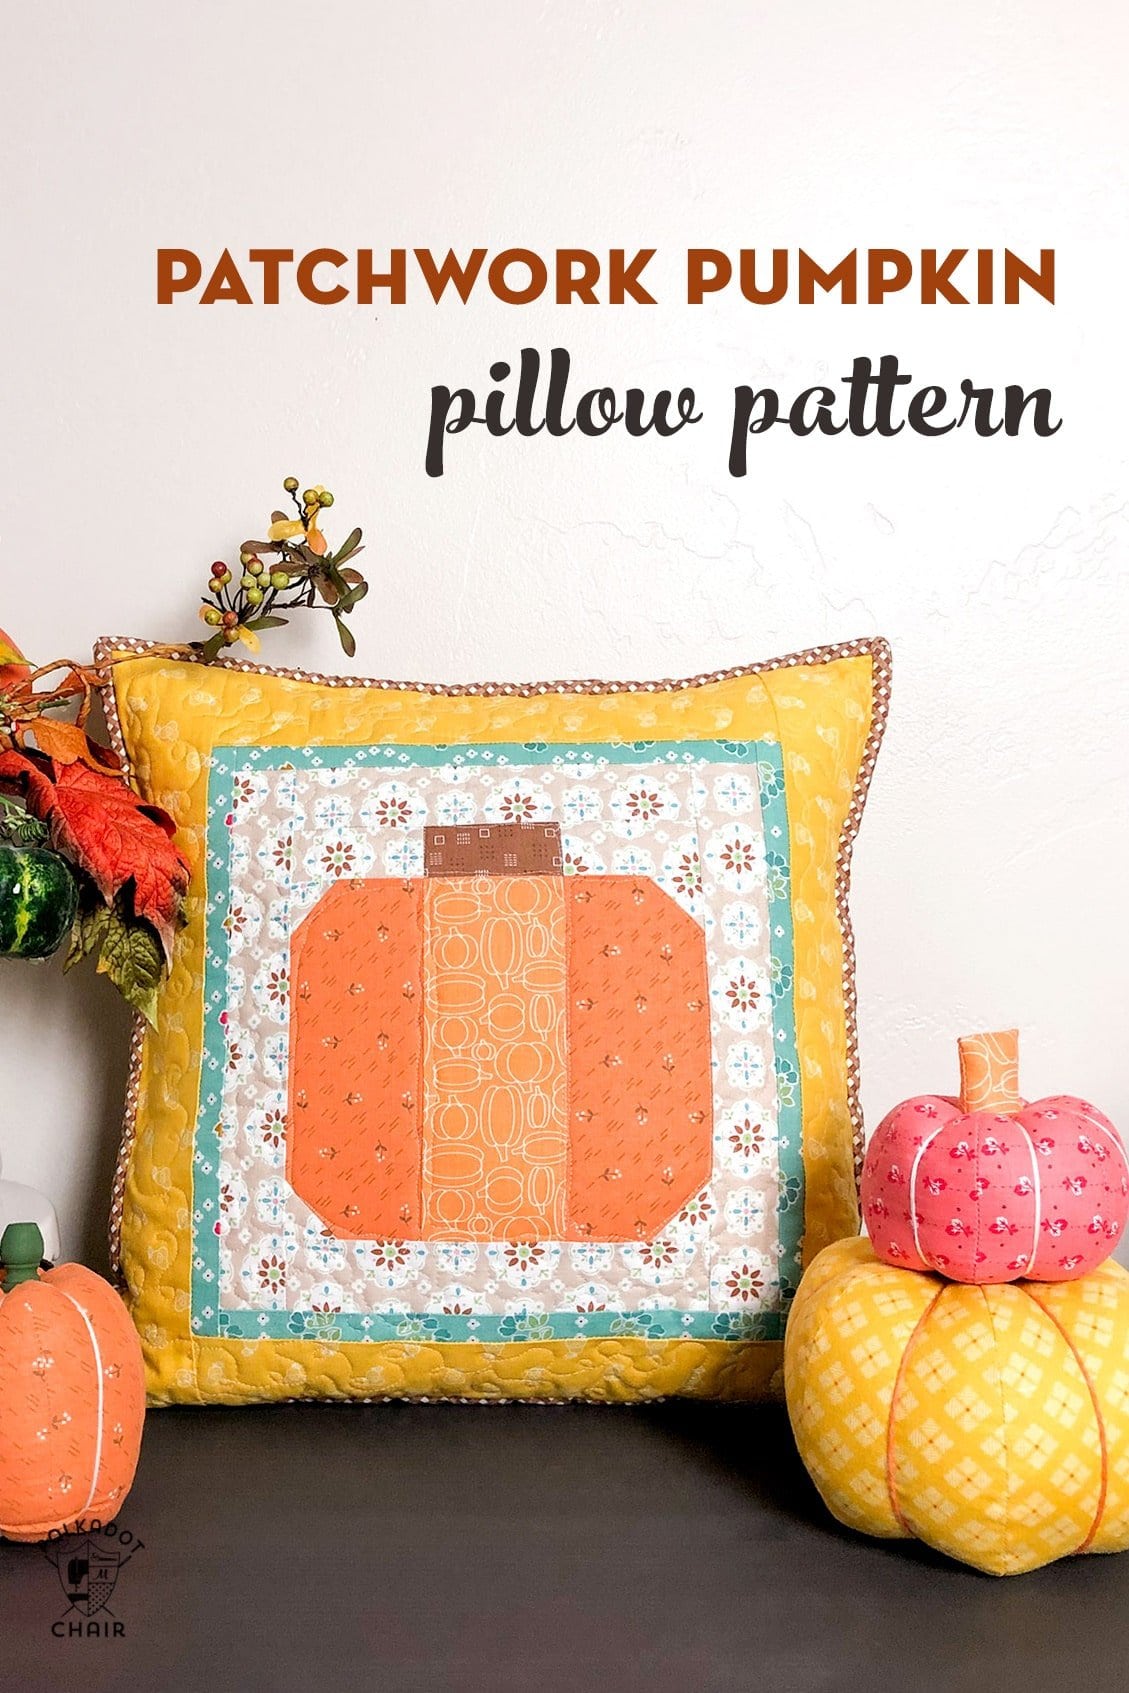 Patchwork Pumpkin Pillow on table decorated for Fall with fabric pumpkins